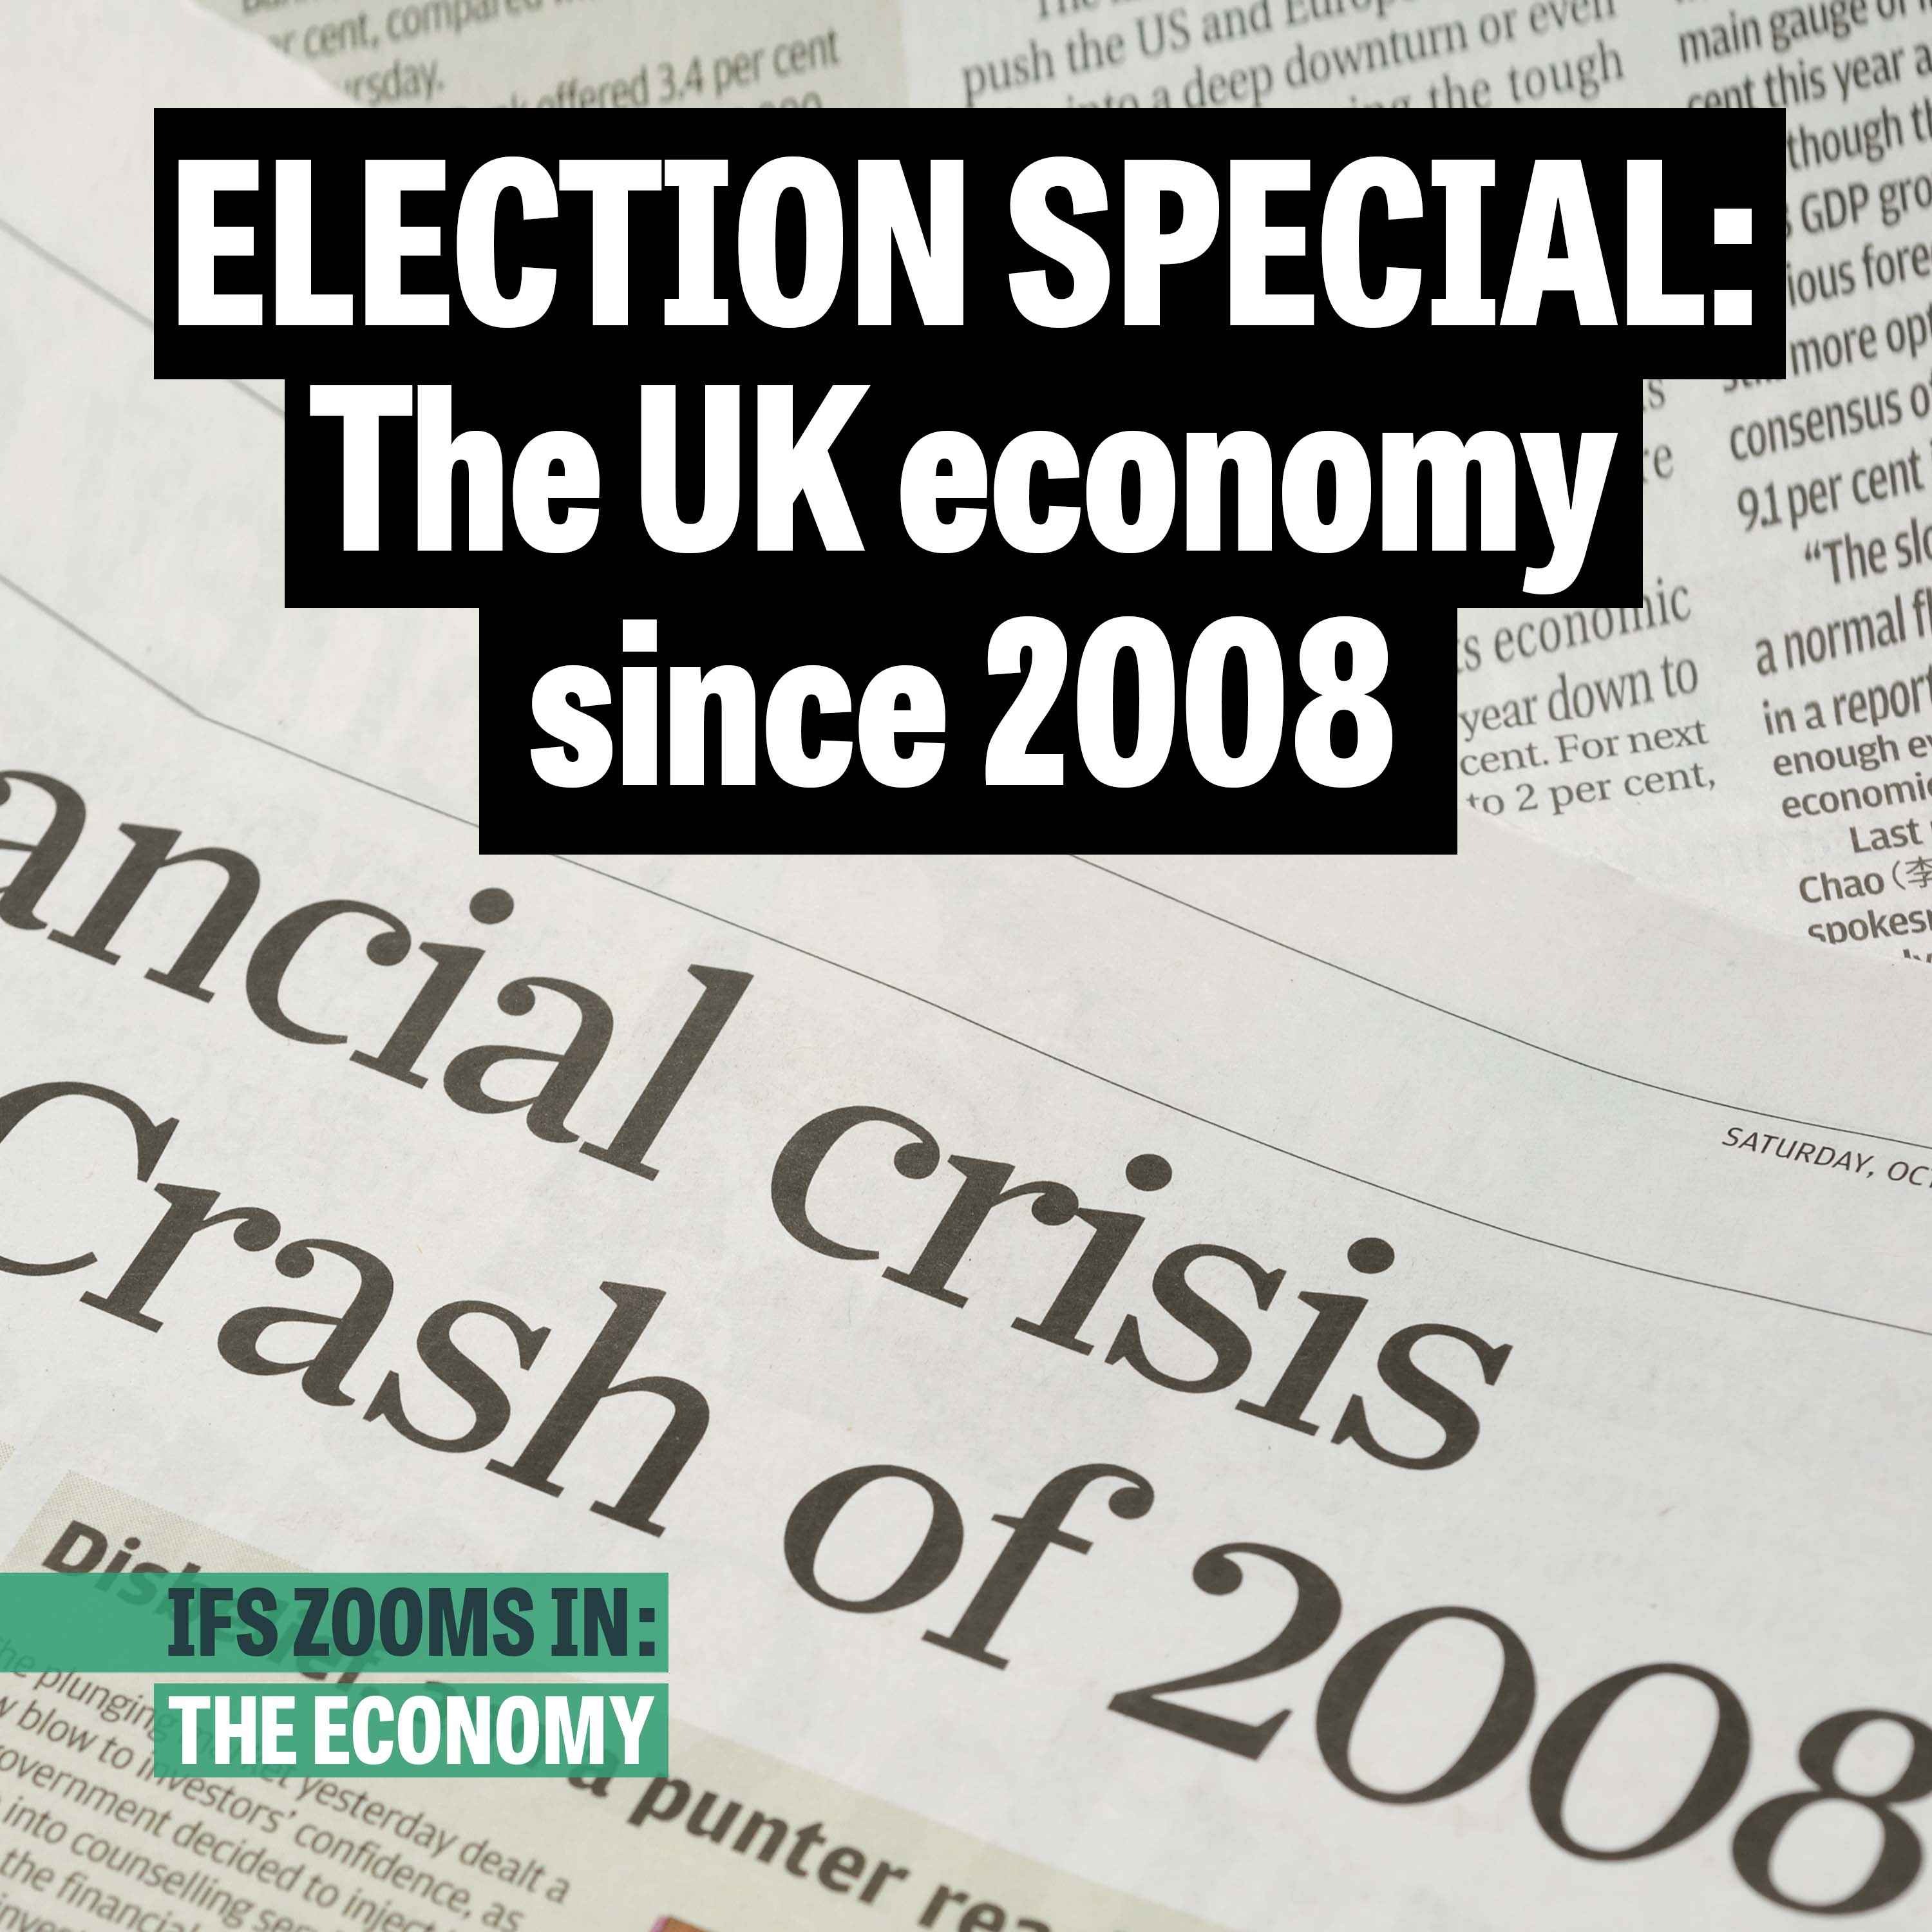 ELECTION SPECIAL: The UK economy since 2008